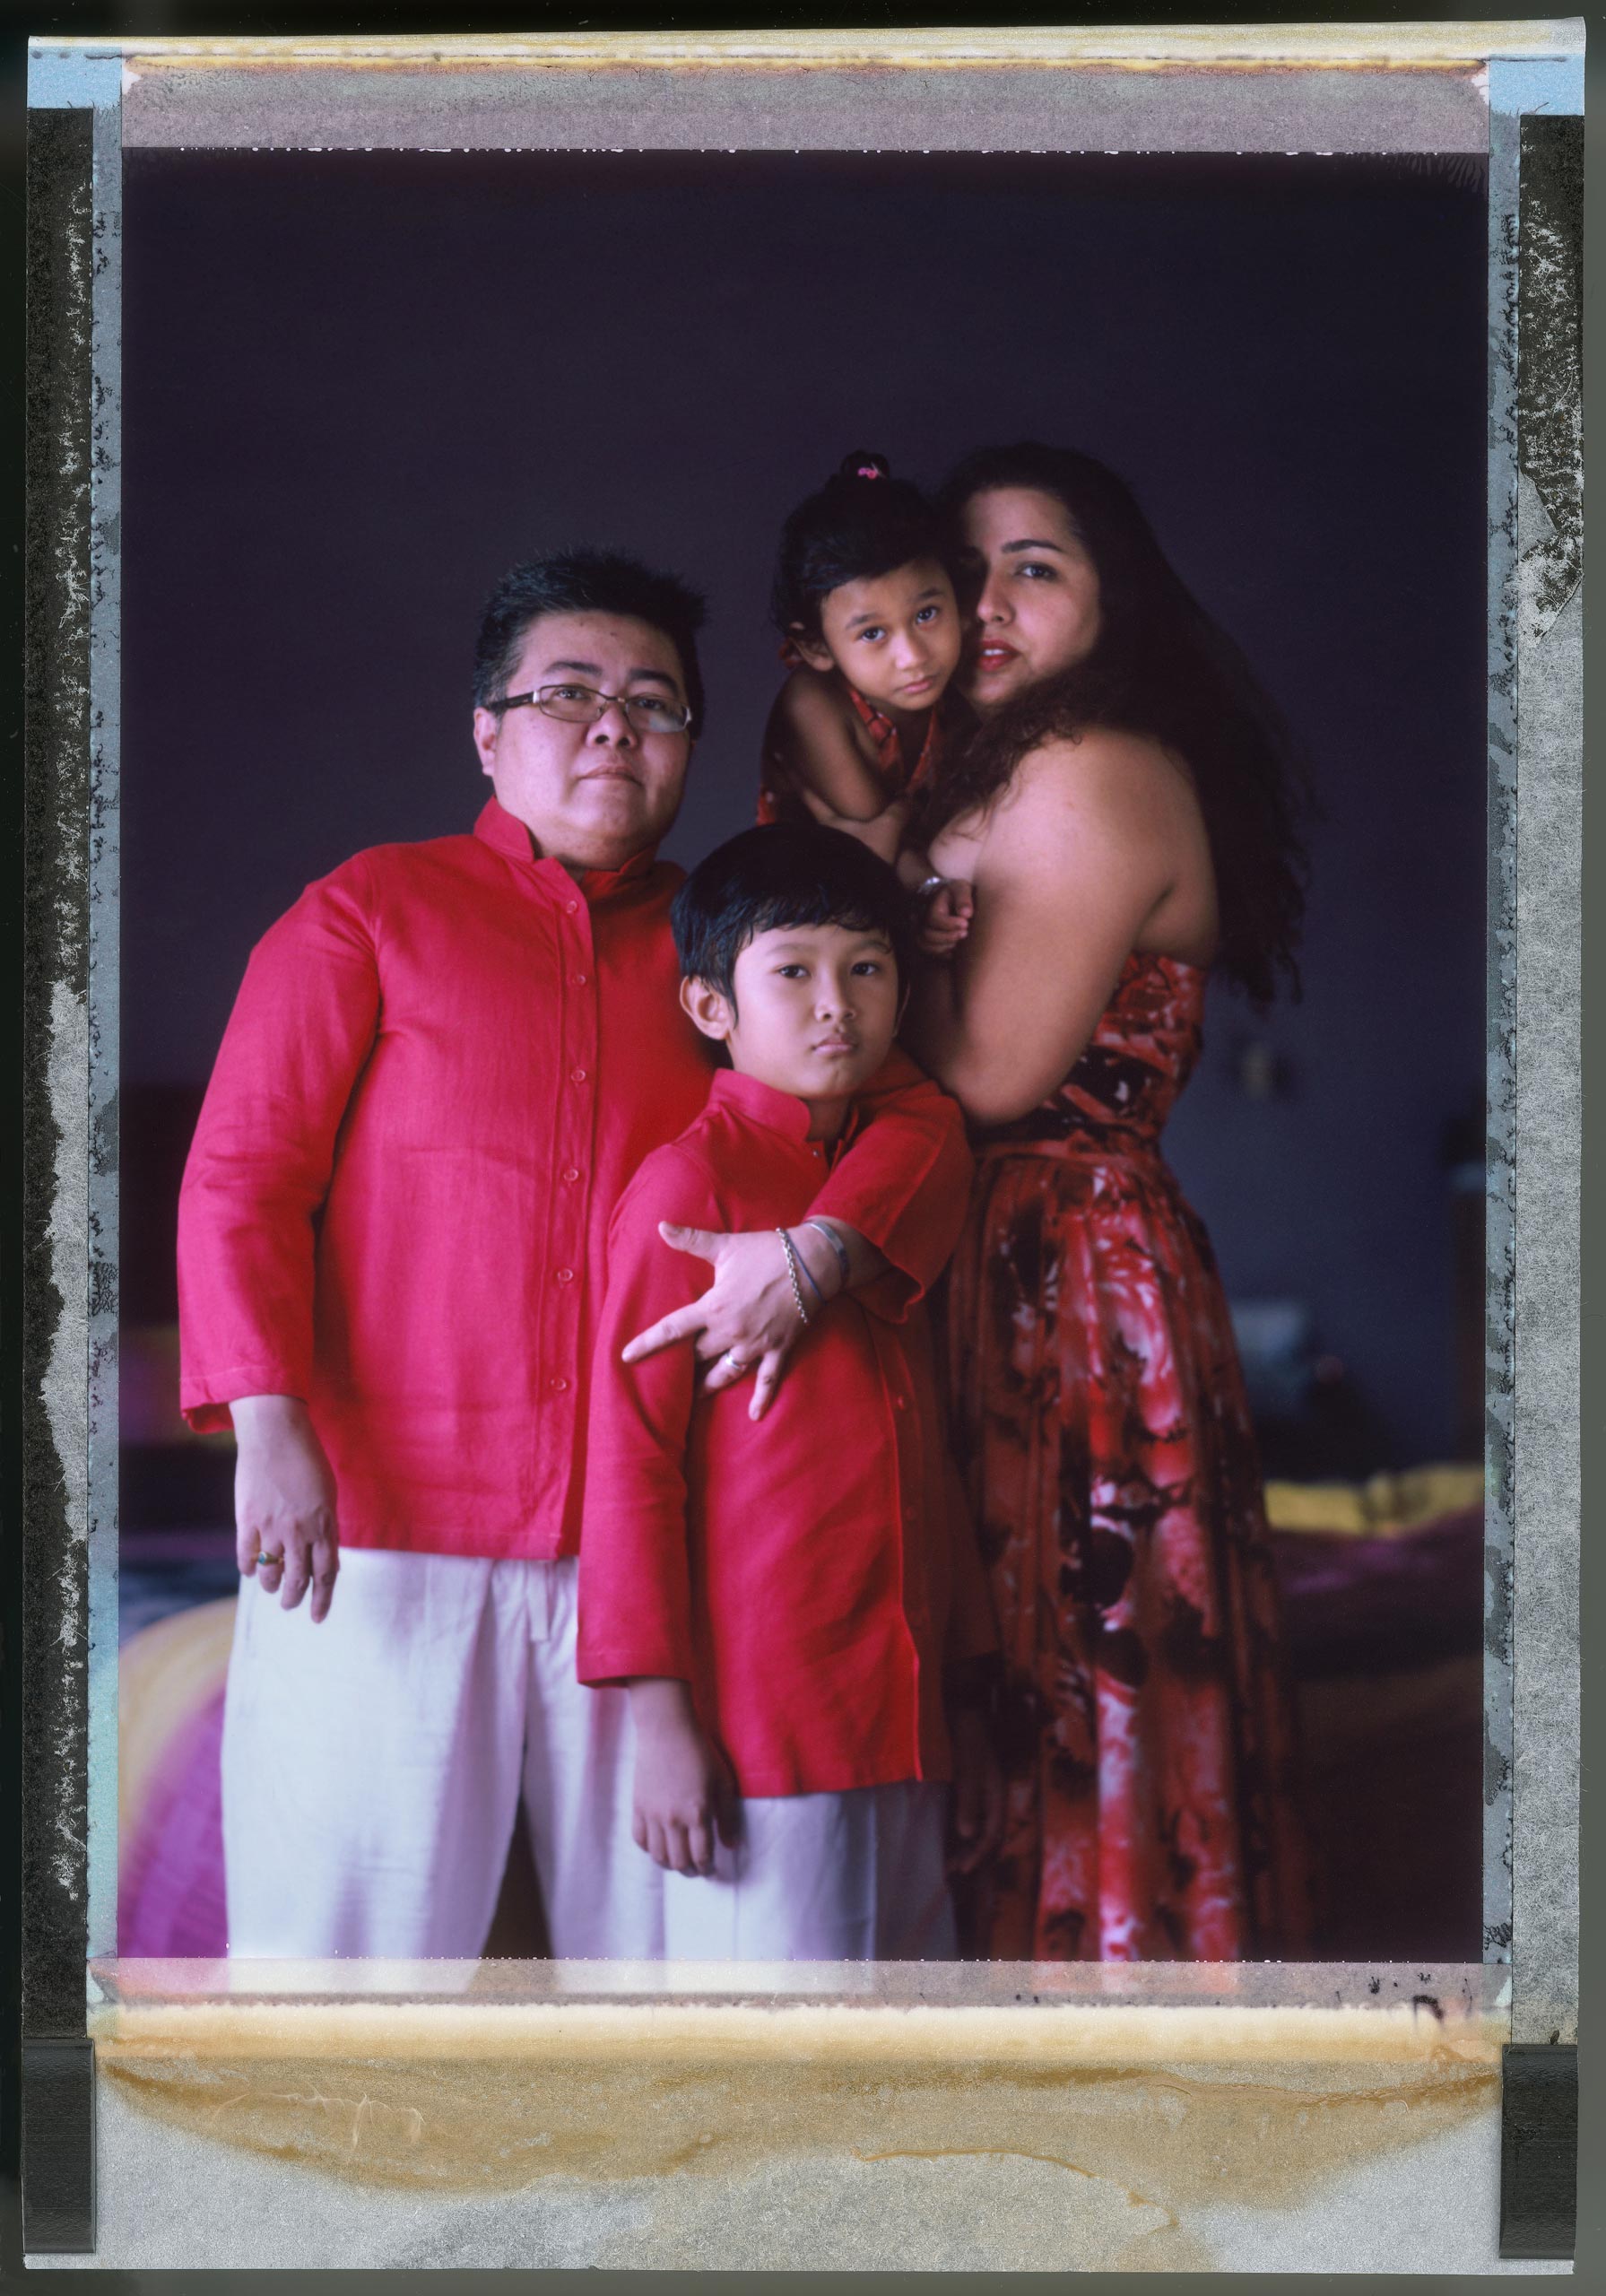 A posed portrait of 47 year old trans man Mitch Yusmar, with his partner of 17 years 39 year old Lalita Abdullah, and their adopted children, 9 year old Izzy, and 3 year old Daniya at home outside Kuala Lumpur, Malaysia. Mitch is the Senior Manager of Seed, an NGO that caters to the needs of homeless people in Kuala Lumpur. Lalita is the Regional Learning and Development Manager for an oil and gas company. Their relationship is not legally recognized and they live with the insecurity that their family could be torn apart should something happen to Lalita who is the only recognized parent. Malaysia. January 2015.  While many countries around the world are legally recognizing same-sex relationships, individuals in nearly 80 countries face criminal sanctions for private consensual relations with another adult of the same sex. Violence and discrimination based on sexual orientation or gender expression is even more widespread. Africa is becoming the worst continent for Lesbian, Gay, Bi-sexual, Transgender, Queer, Inter-sex (LGBTQI) individuals. More than two thirds of African countries have laws criminalizing consensual same-sex acts. In some, homosexuality is punishable by death. In Nigeria new homophobic laws introduced in 2013 led to dramatic increase in attacks. Under Sharia Law, homosexuality is punishable by death, up to 50 lashes and six months in prison for woman; for men elsewhere, up to 14 years in prison. Same sex acts are illegal in Uganda. A discriminatory law was passed then struck down and homophobic attacks rose tenfold after the passage of the Anti-Homosexuality Act. In Cameroon it is also illegal. More cases against suspected homosexuals are brought here than any other African country. In stark contrast with the rest of the continent, same sex relationships are legal in South Africa. The country has the most liberal laws toward gays and lesbians on the continent, with a constitution guaranteeing LBGTQI rights. Because of this, LGBTQI Africans from all